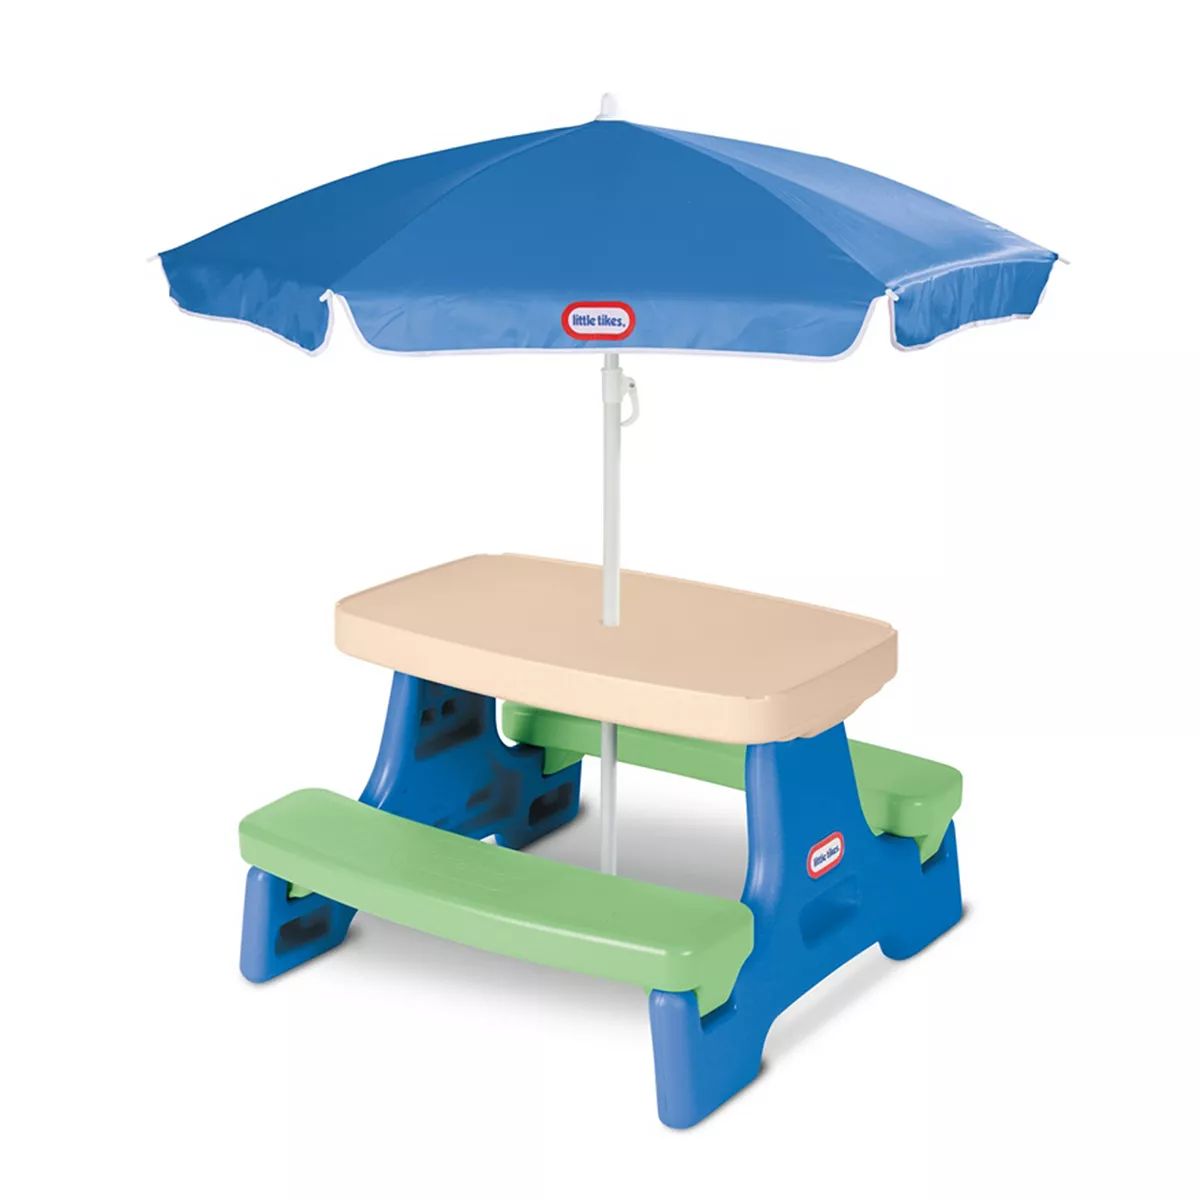 Little Tikes Easy Store Jr. Play Table with Umbrella | Kohl's